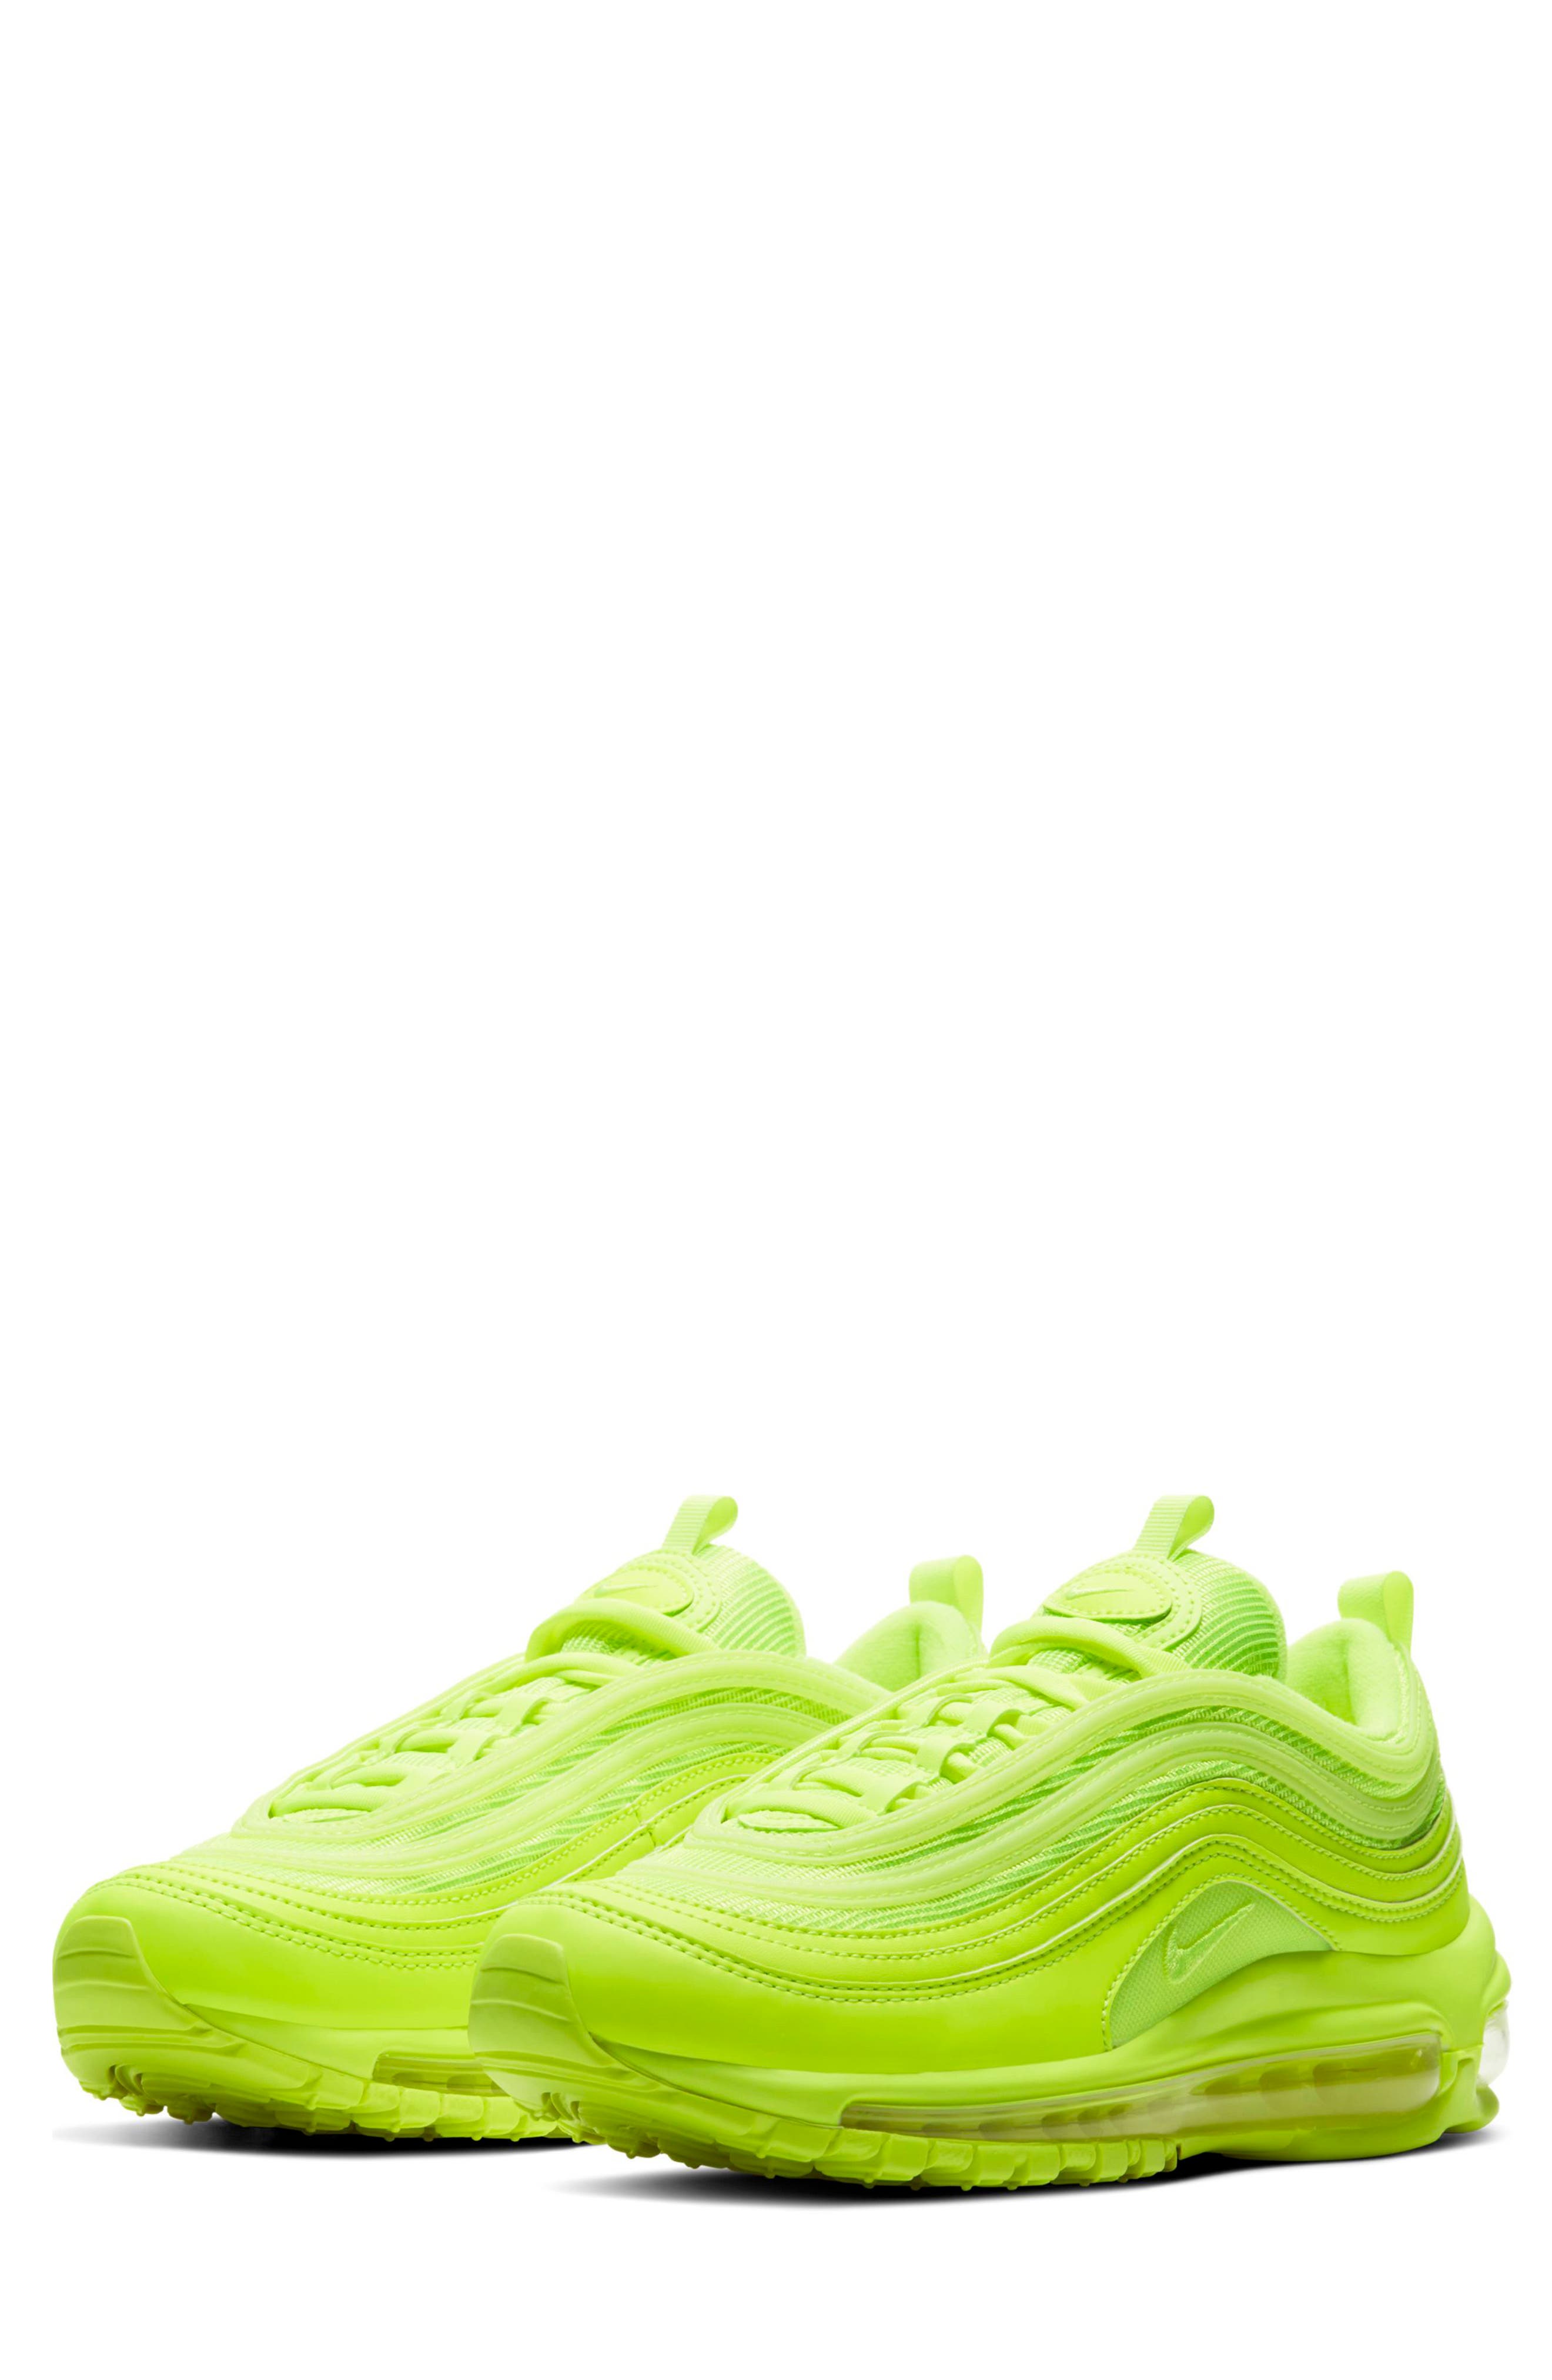 UPC 194274400670 product image for Nike Air Max 97 Sneaker, Size 8 in Volt/Volt at Nordstrom | upcitemdb.com